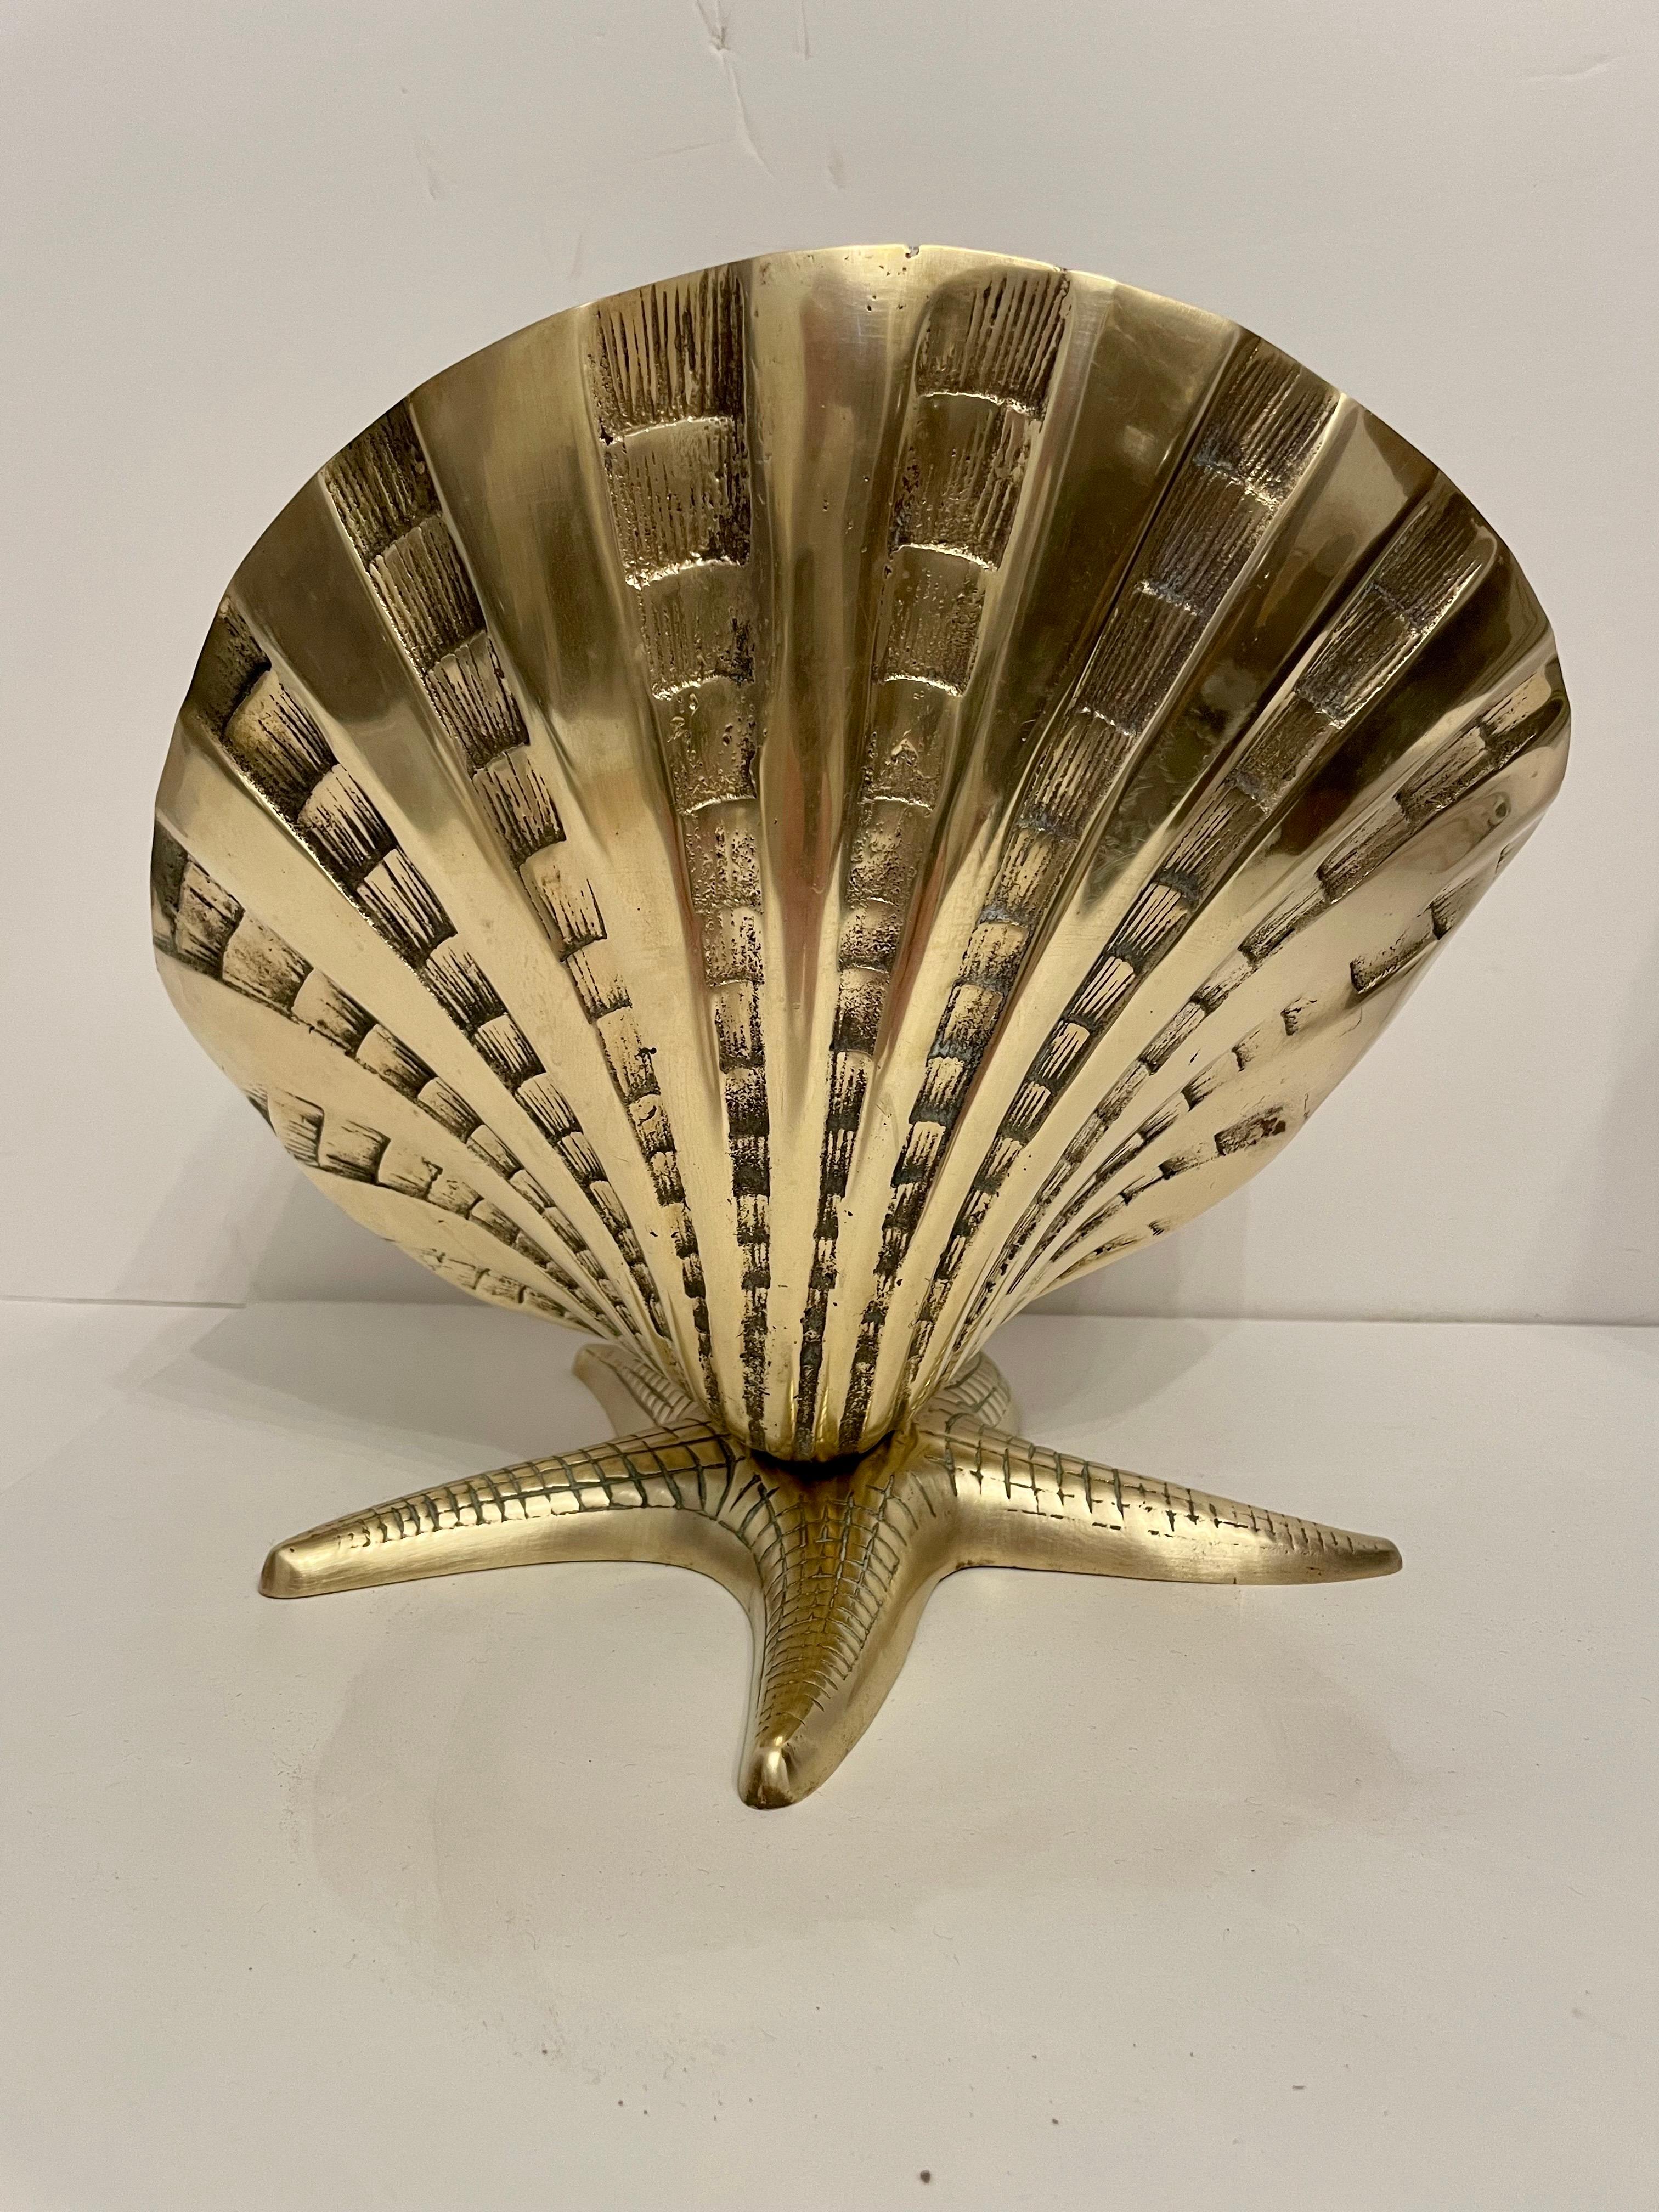 Very large brass sea shell on star fish base. Hand polished. Nice statement piece. Very unusual design with nice detail. Overall nice condition. Ready for your beach house! Can be boxed and shipped.

 Extra Large Brass Sea Shell on Star Fish Base, a